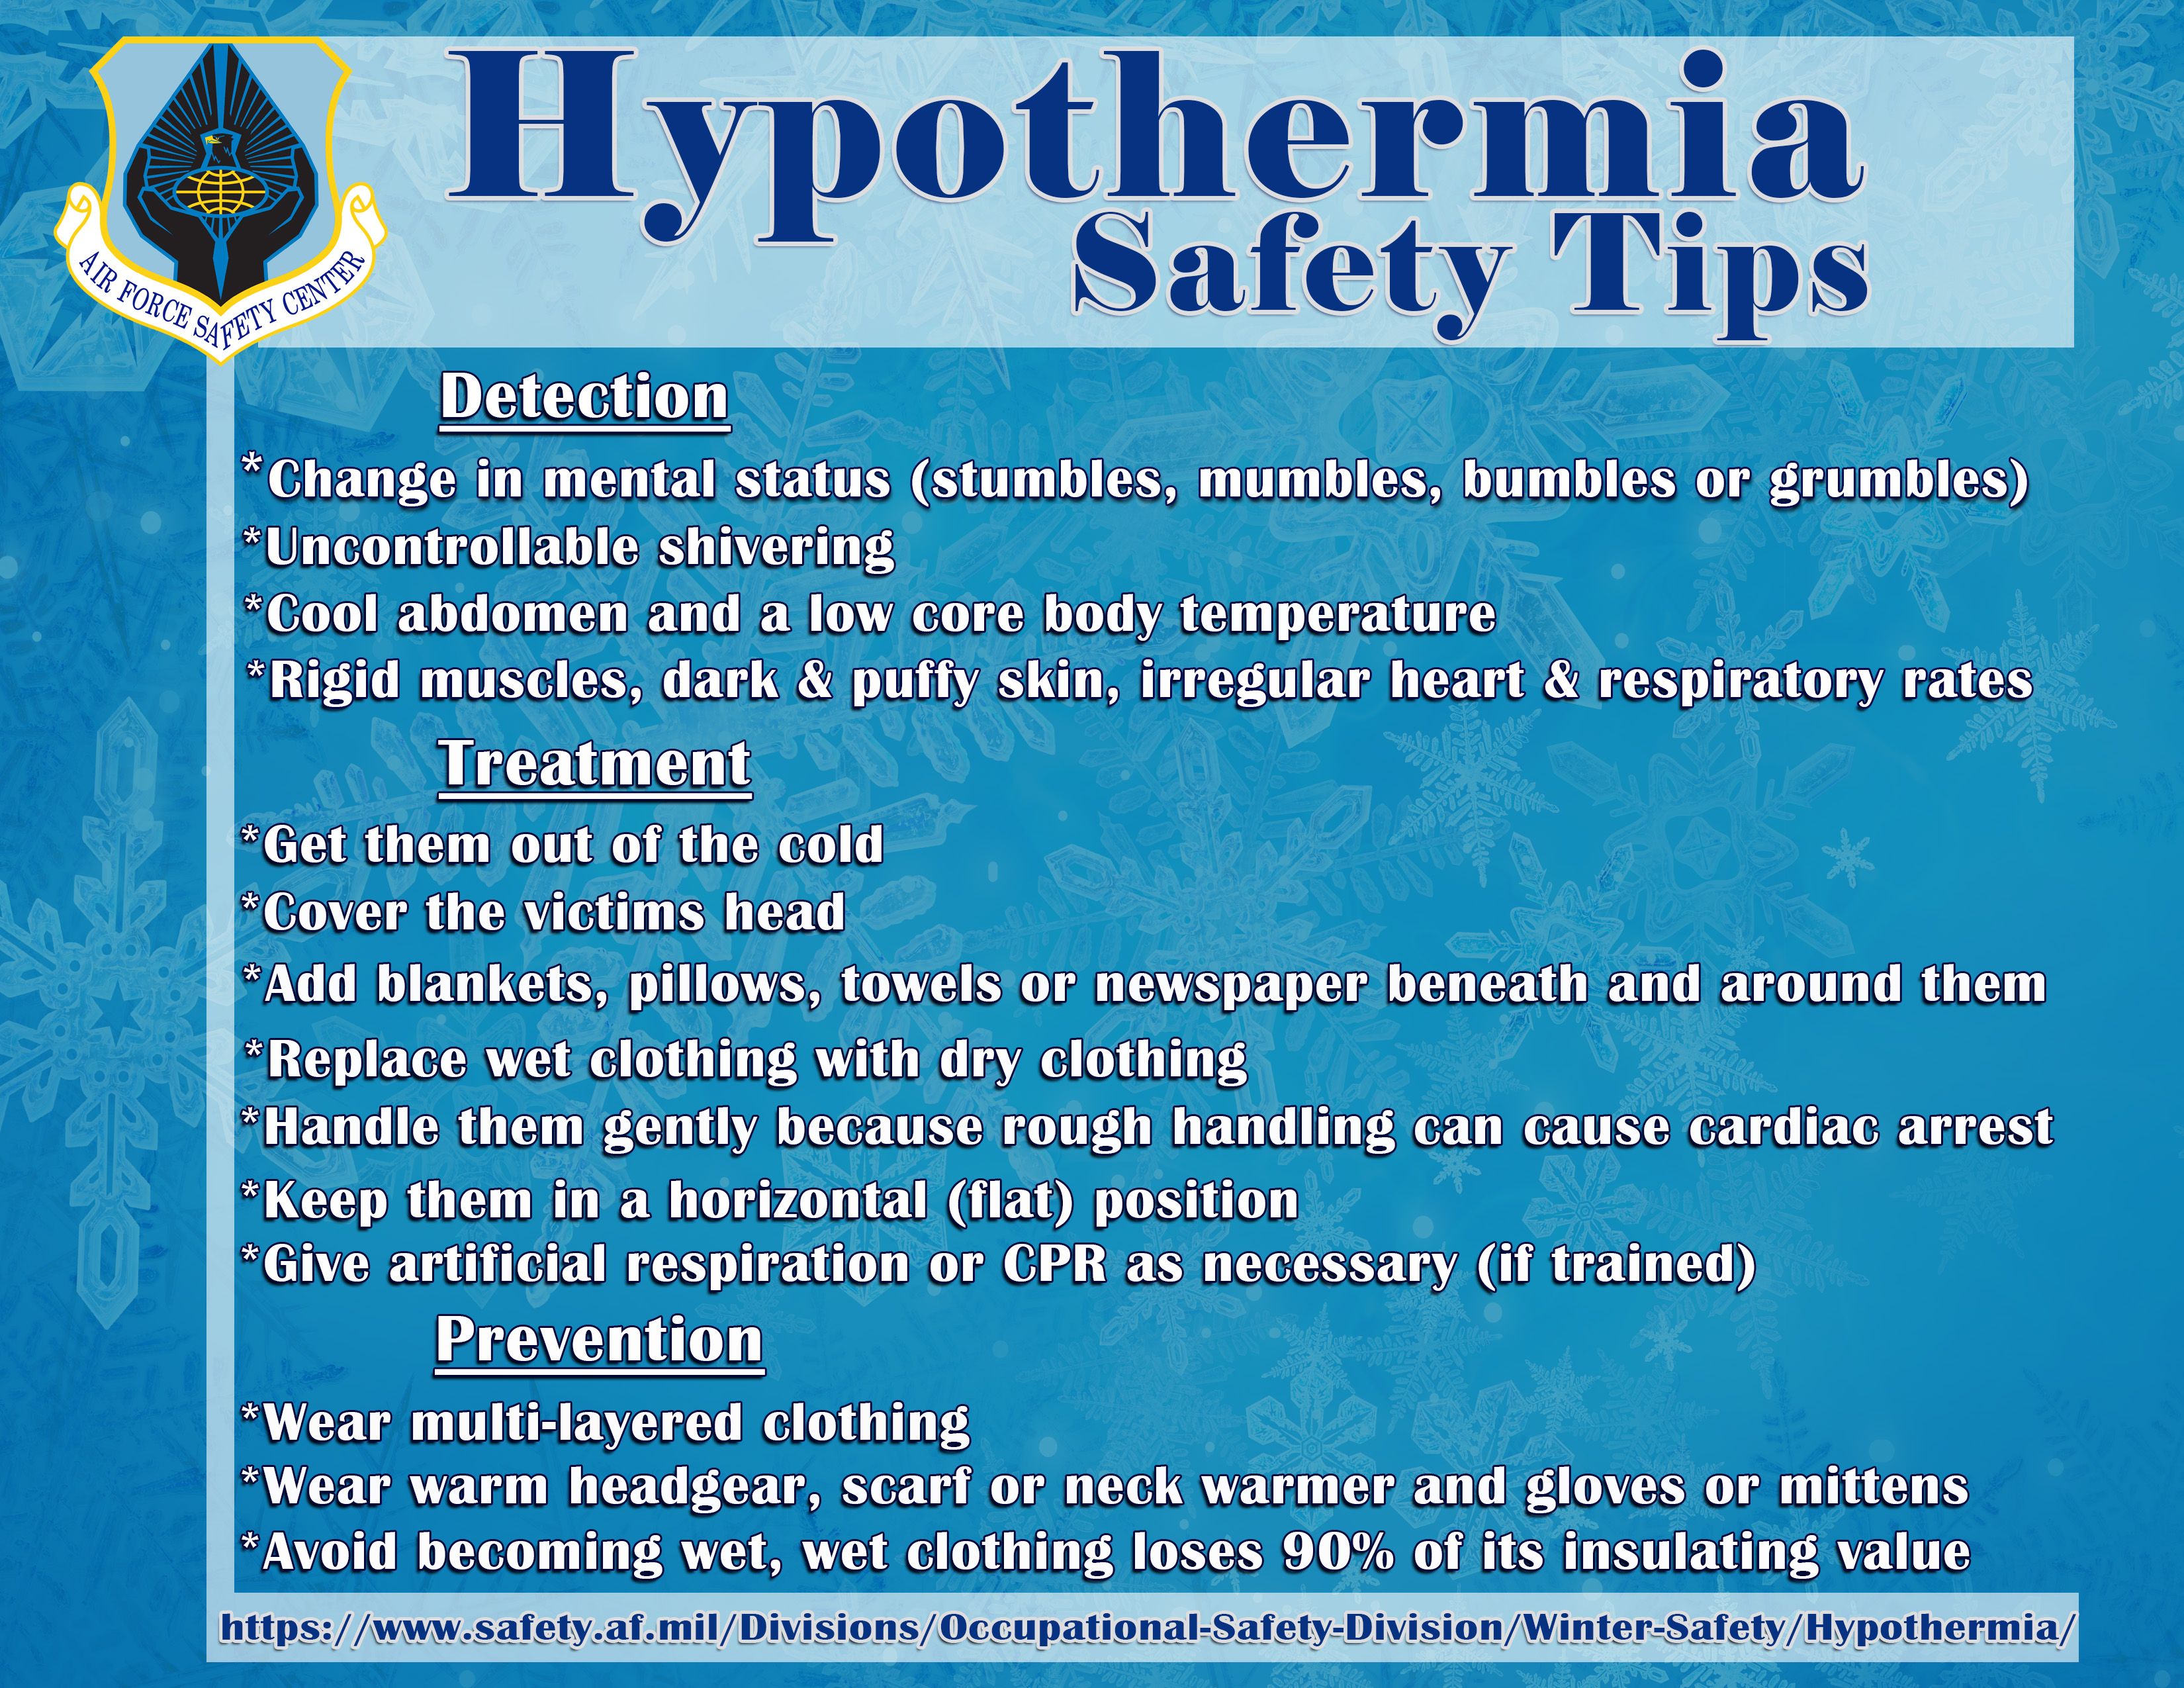 Hypothermia Safety Tips Poster